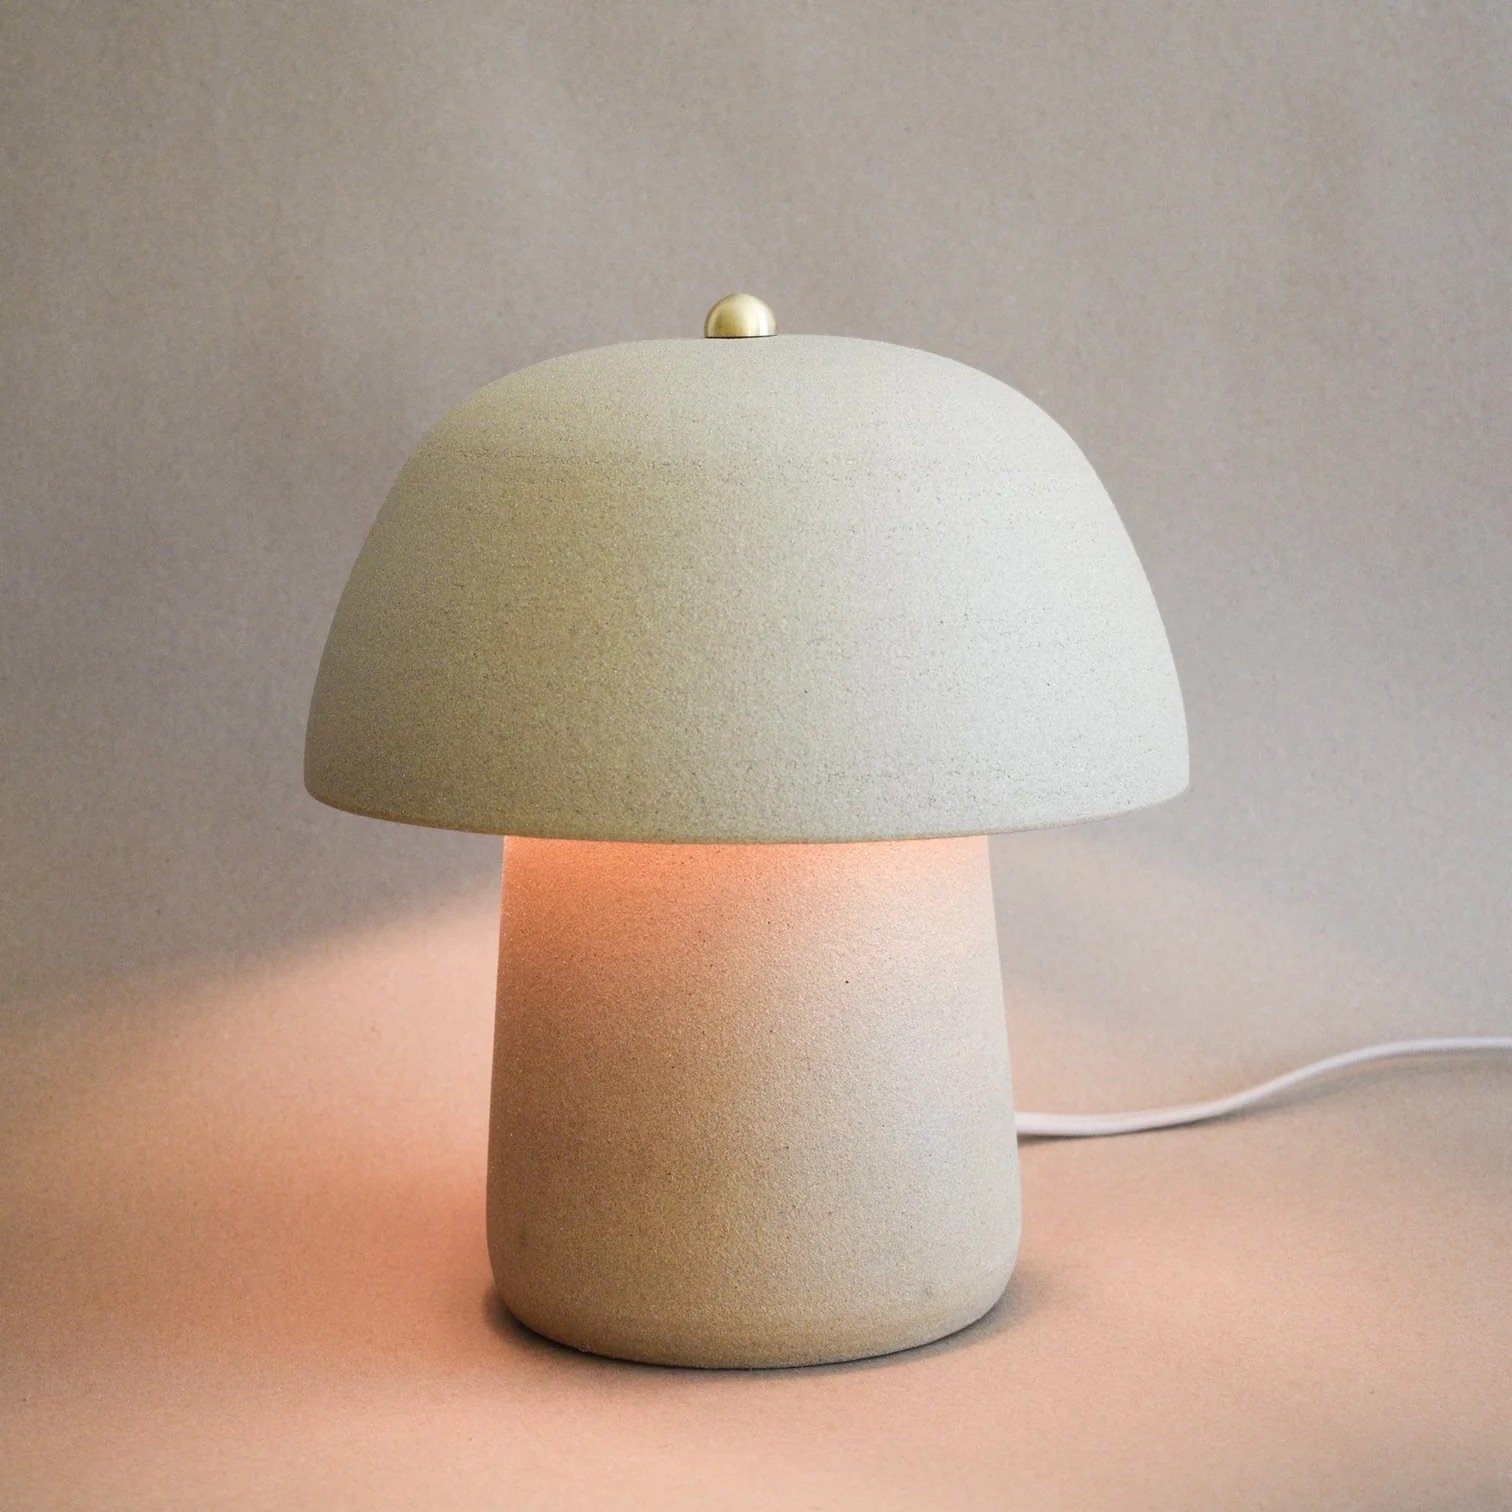 ceramicah-decor-mini-tera-lamp-by-ceramicah-stone-curbside-pick-up-only-37482847961343_1512x.jpeg